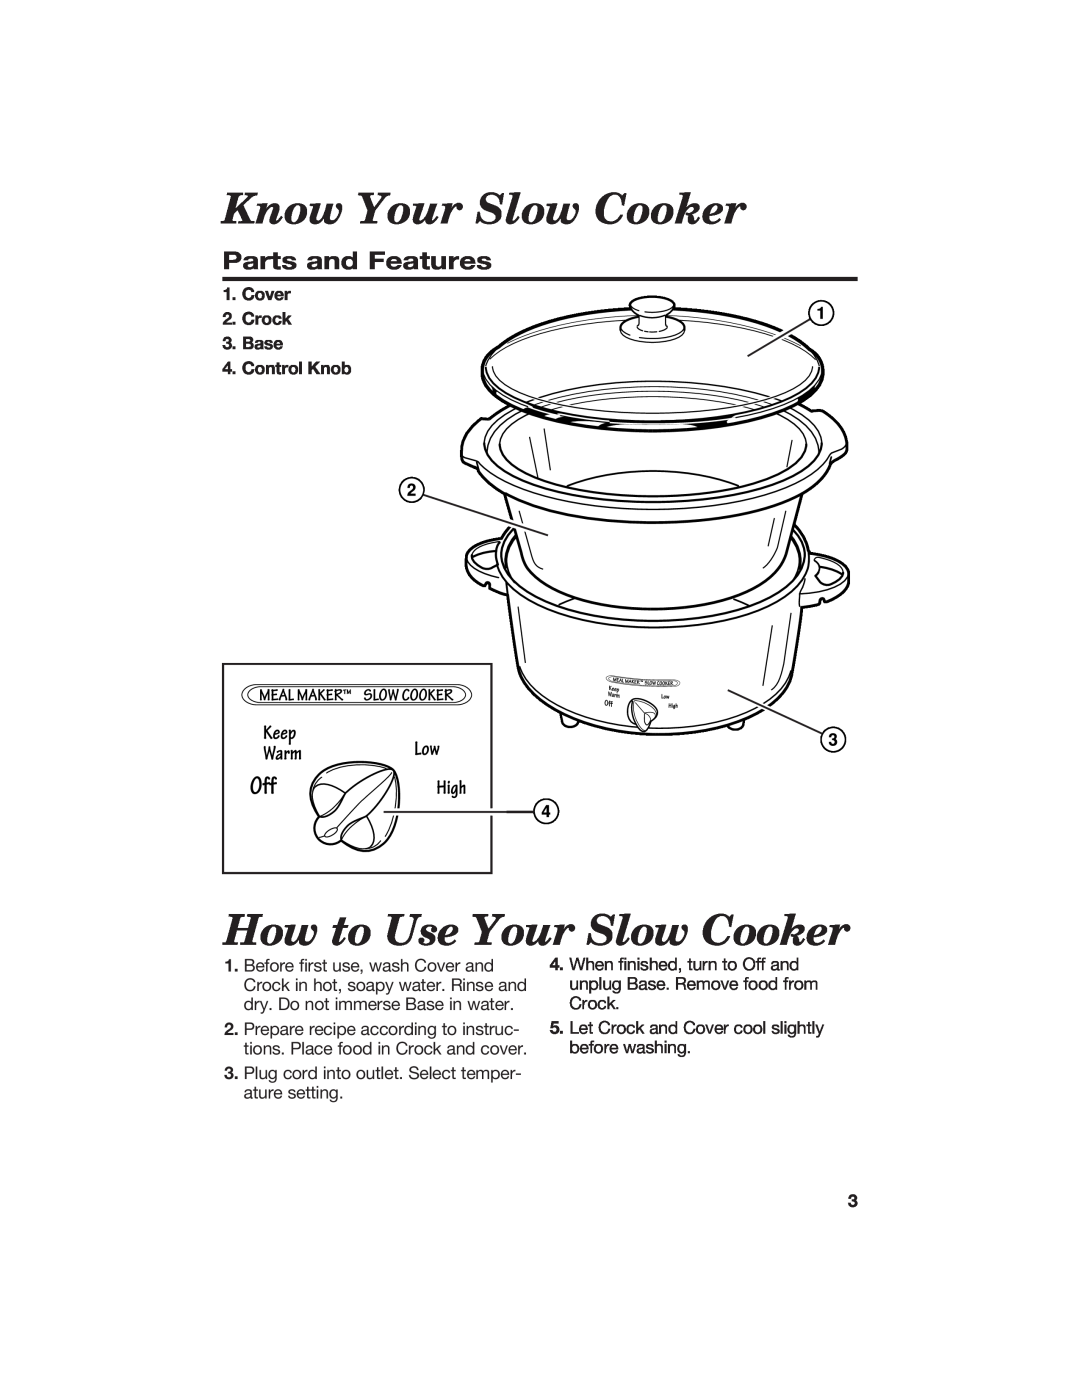 Hamilton Beach 840056100 manual Know Your Slow Cooker, How to Use Your Slow Cooker, Parts and Features 